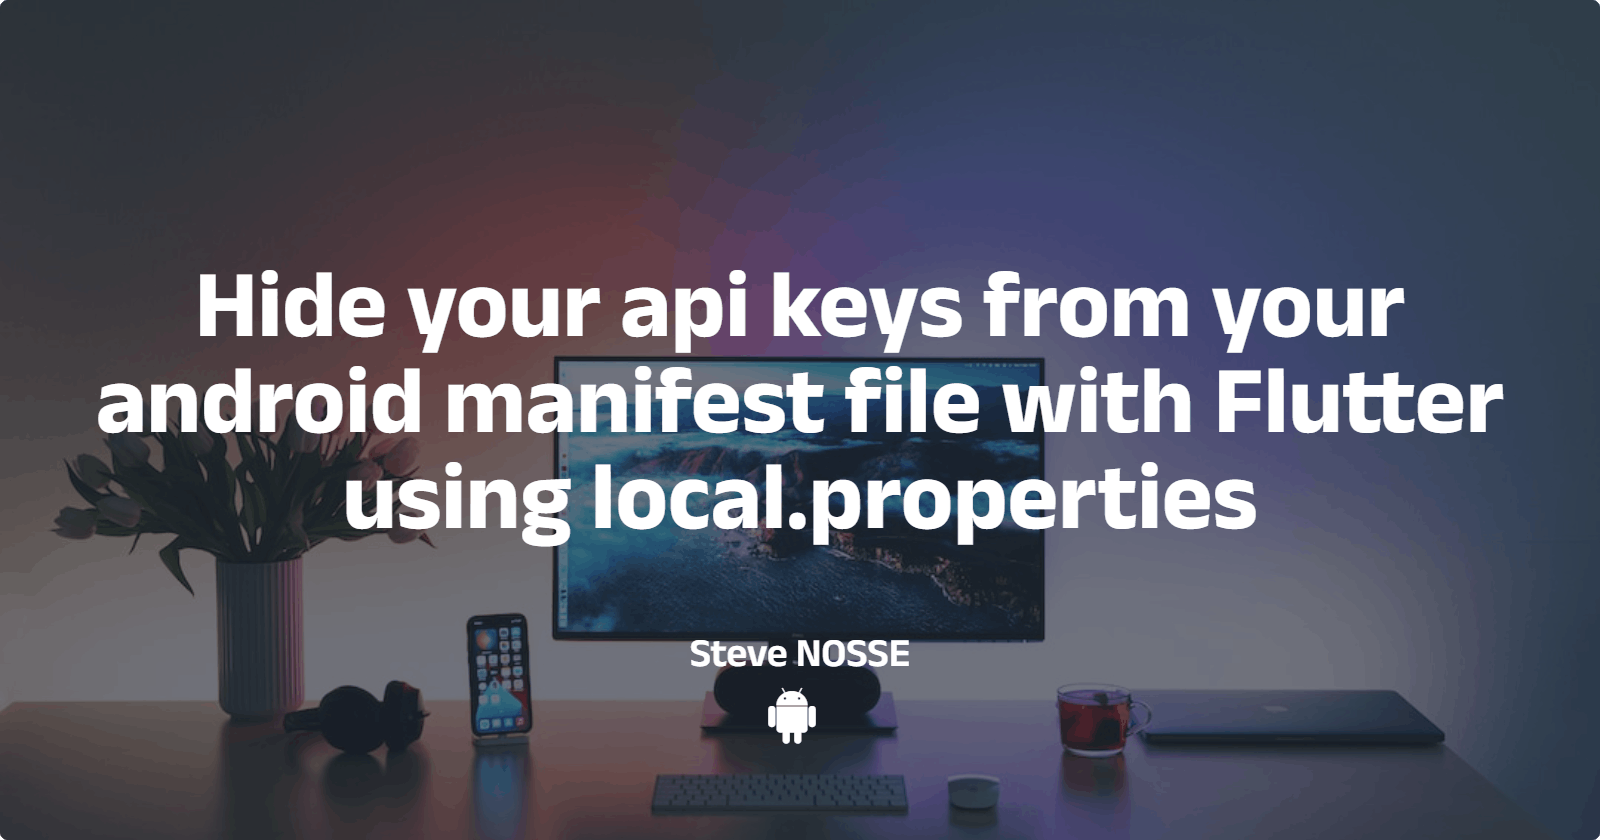 Hide your api keys from your android manifest file with Flutter using local.properties